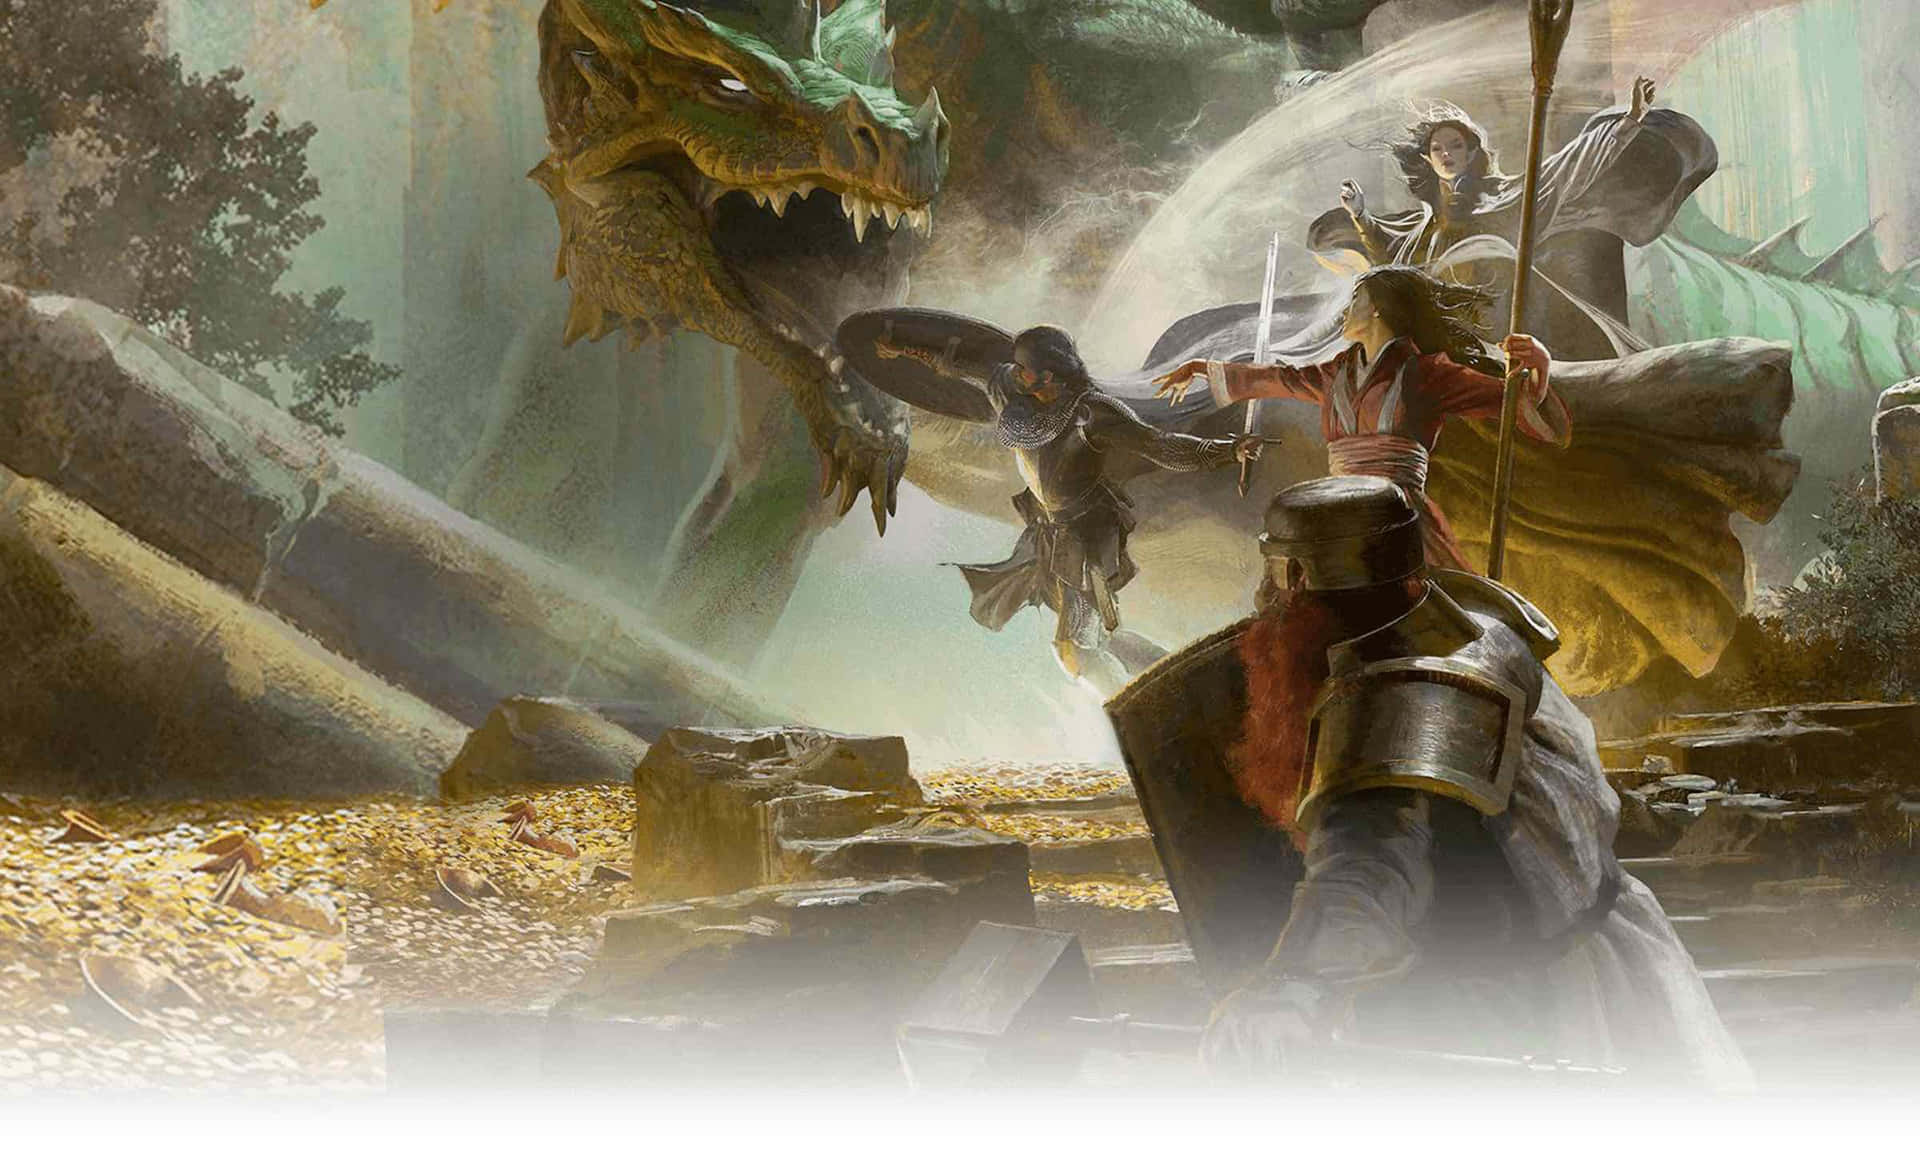 Dare to explore the unknown with Dungeons&Dragons